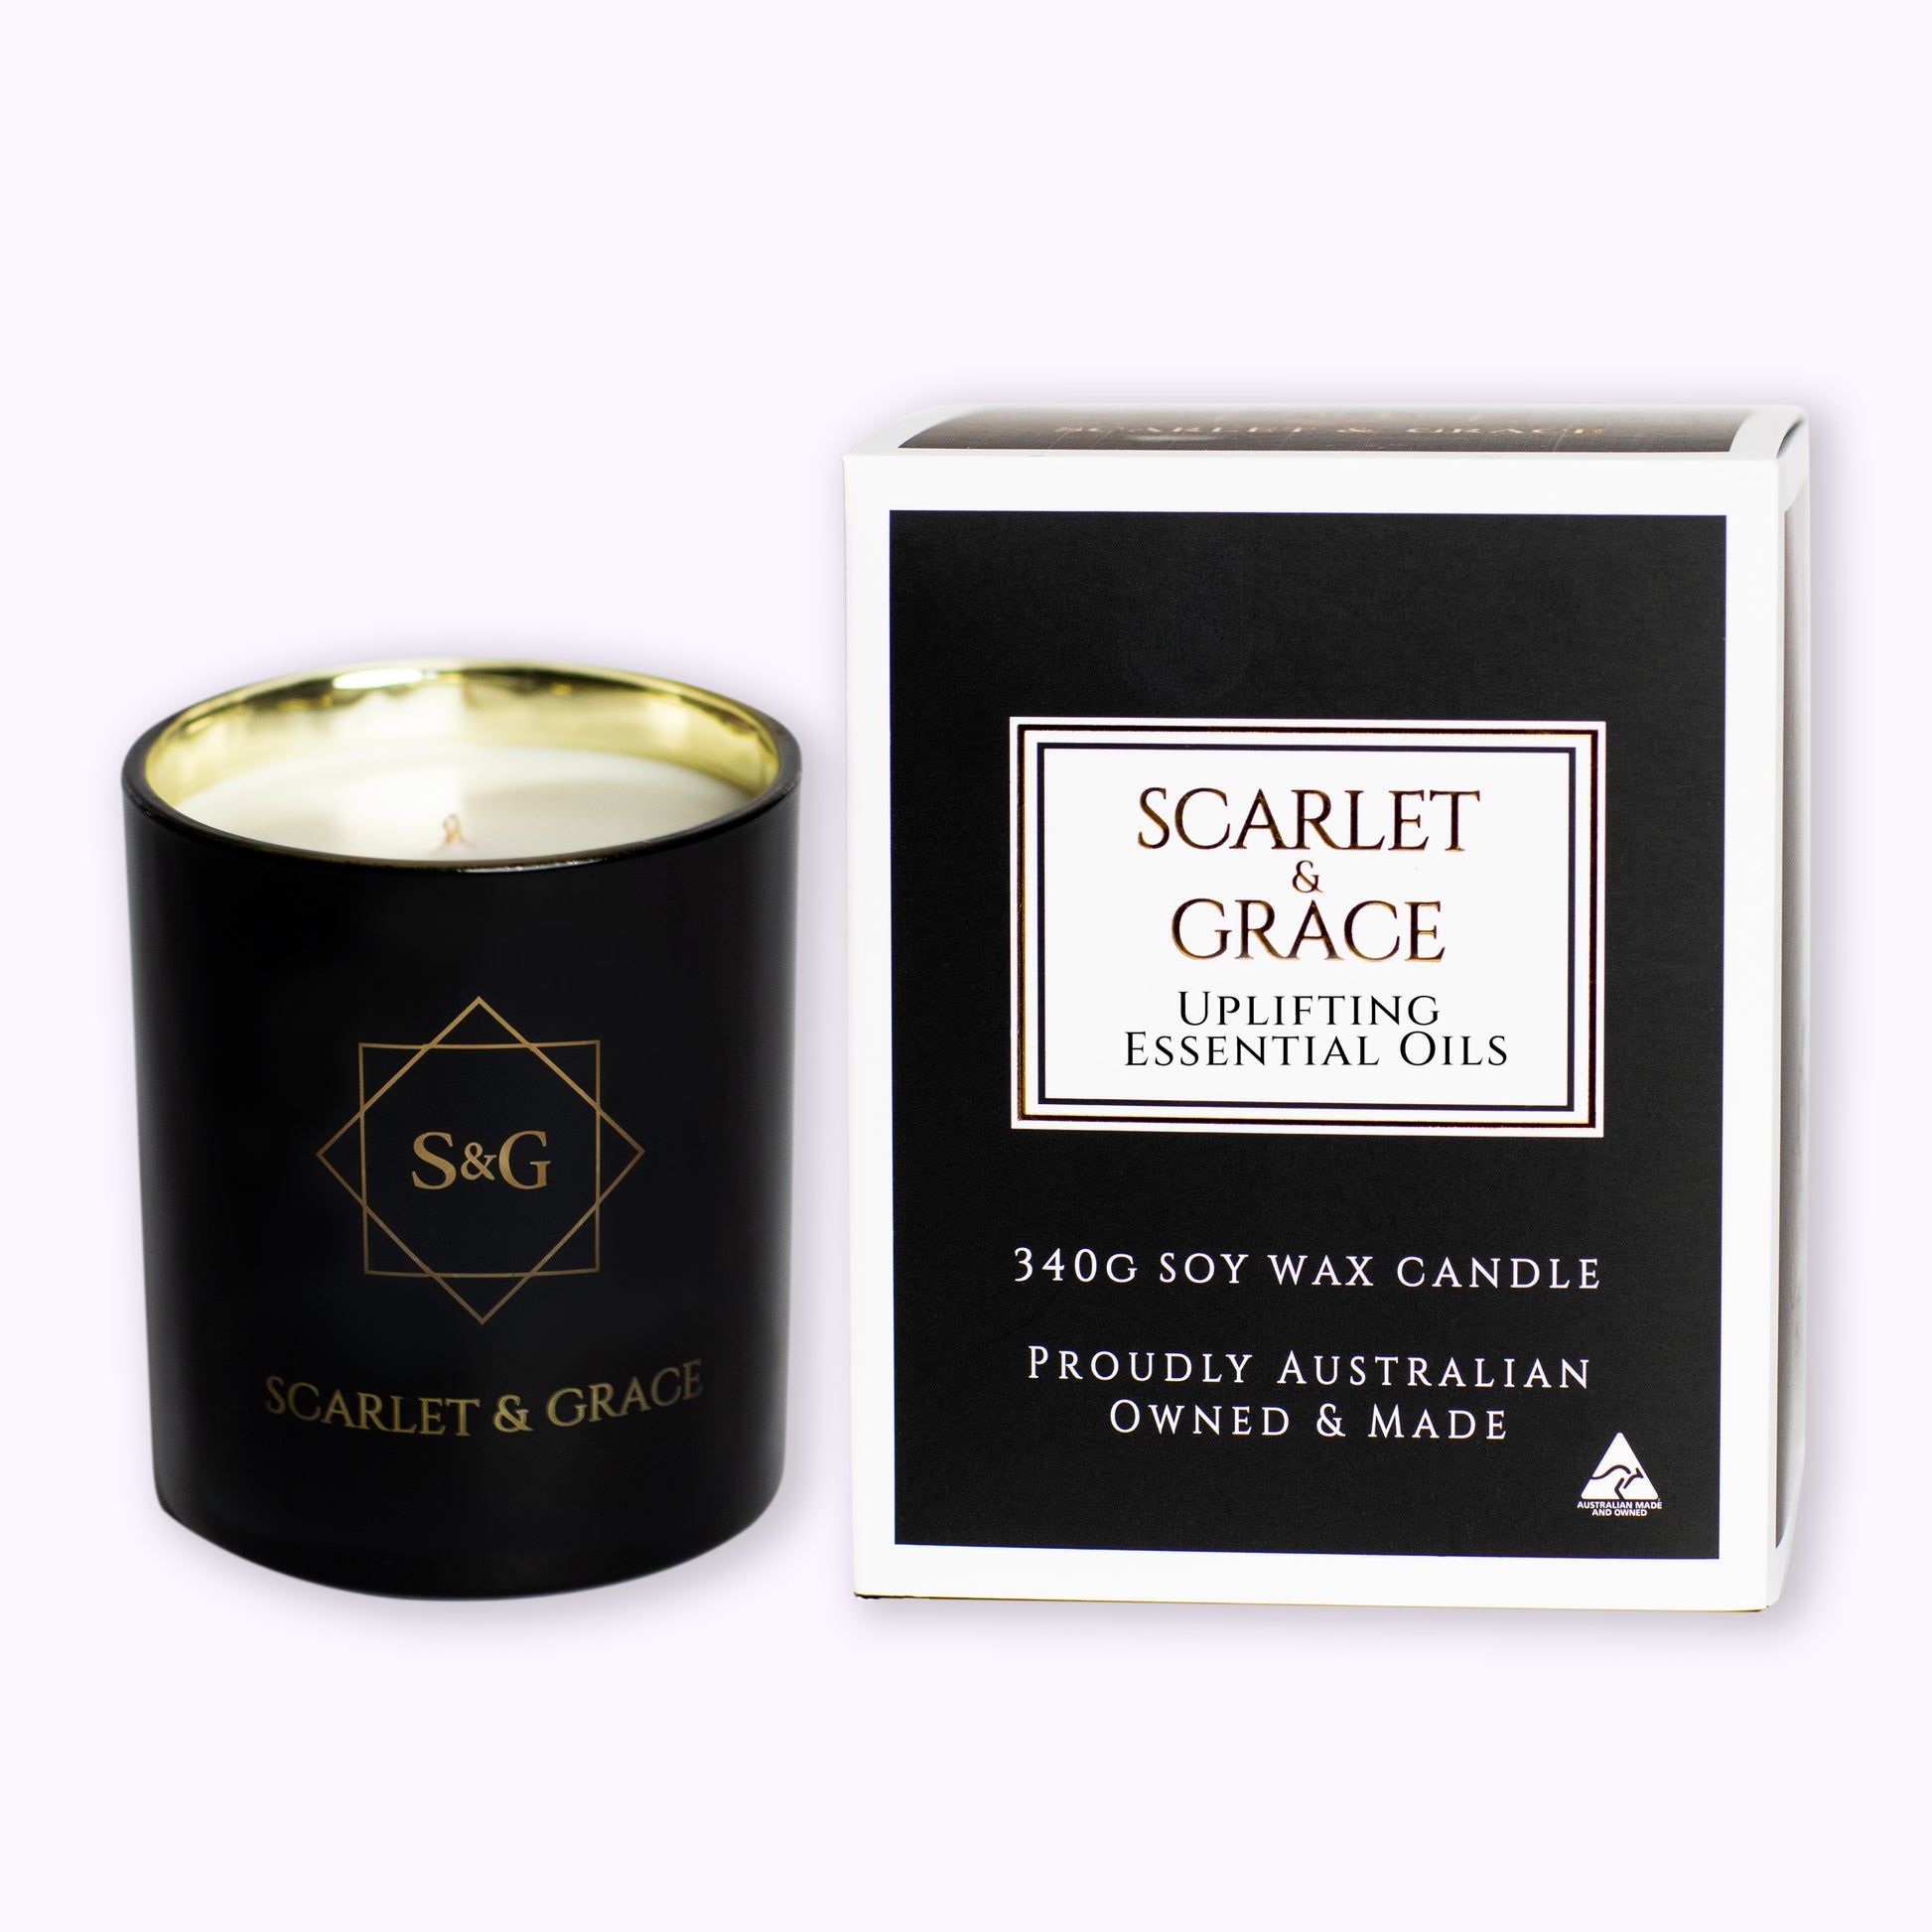 Uplifting Essential Oils - 340gm Soy Wax Candle - Scarlet & Grace